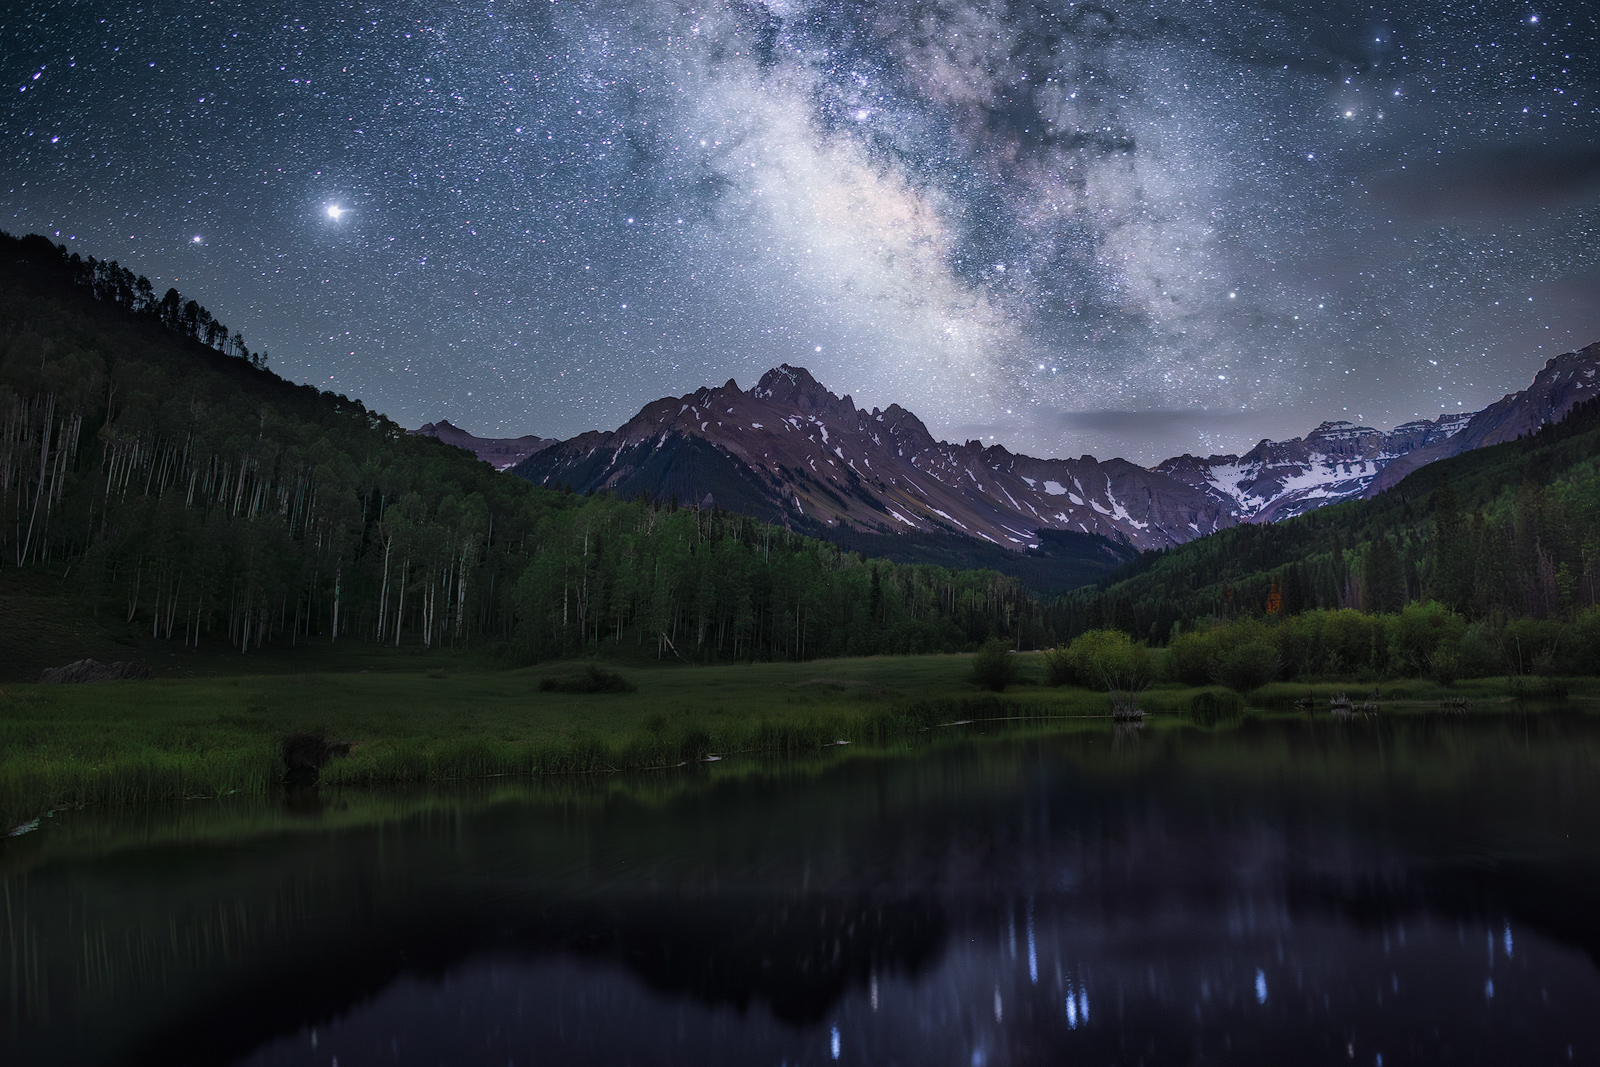 A beautiful Milky Way captured behind an iconic mountain location in Colorado.